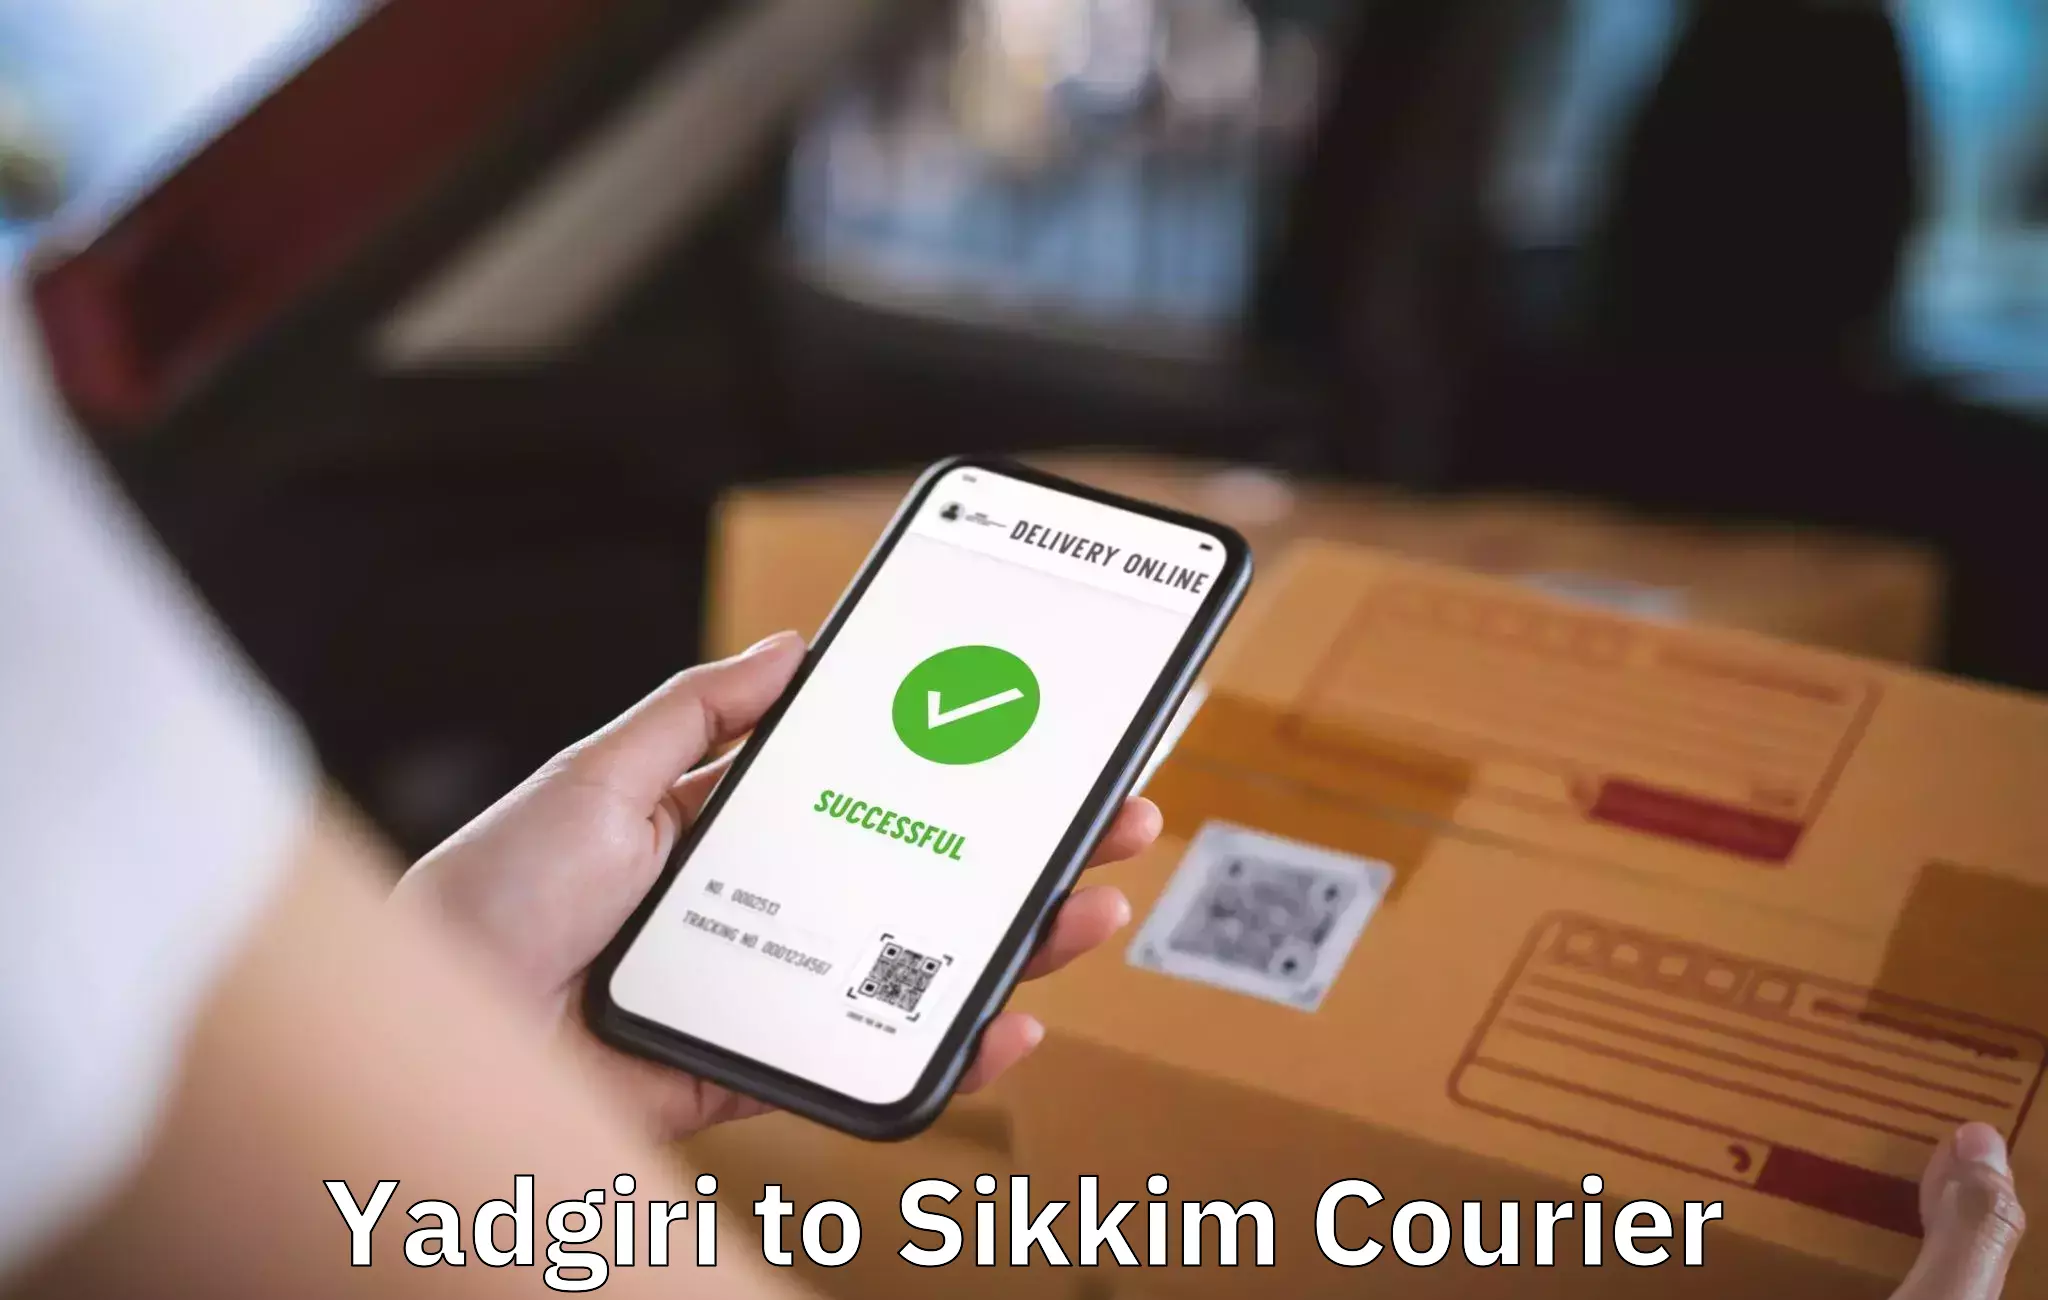 Trusted moving company Yadgiri to Sikkim